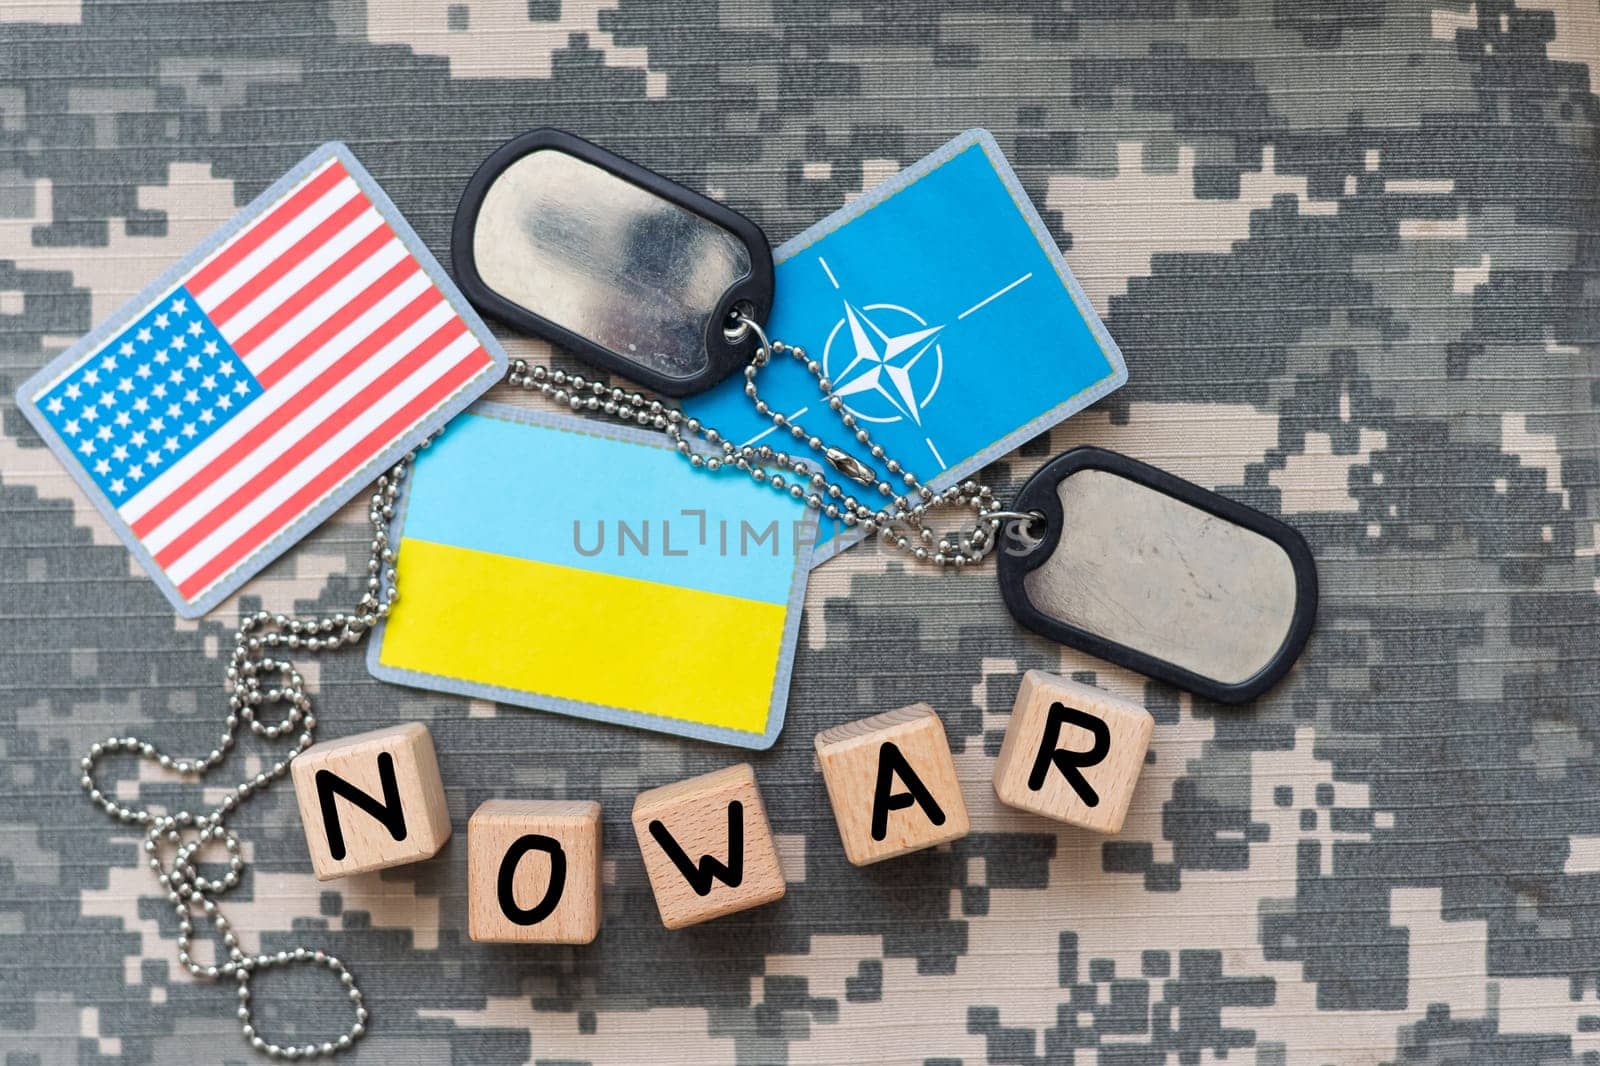 Military patch and bullets on pixel Ukrainian camouflage, closeup no war. High quality photo